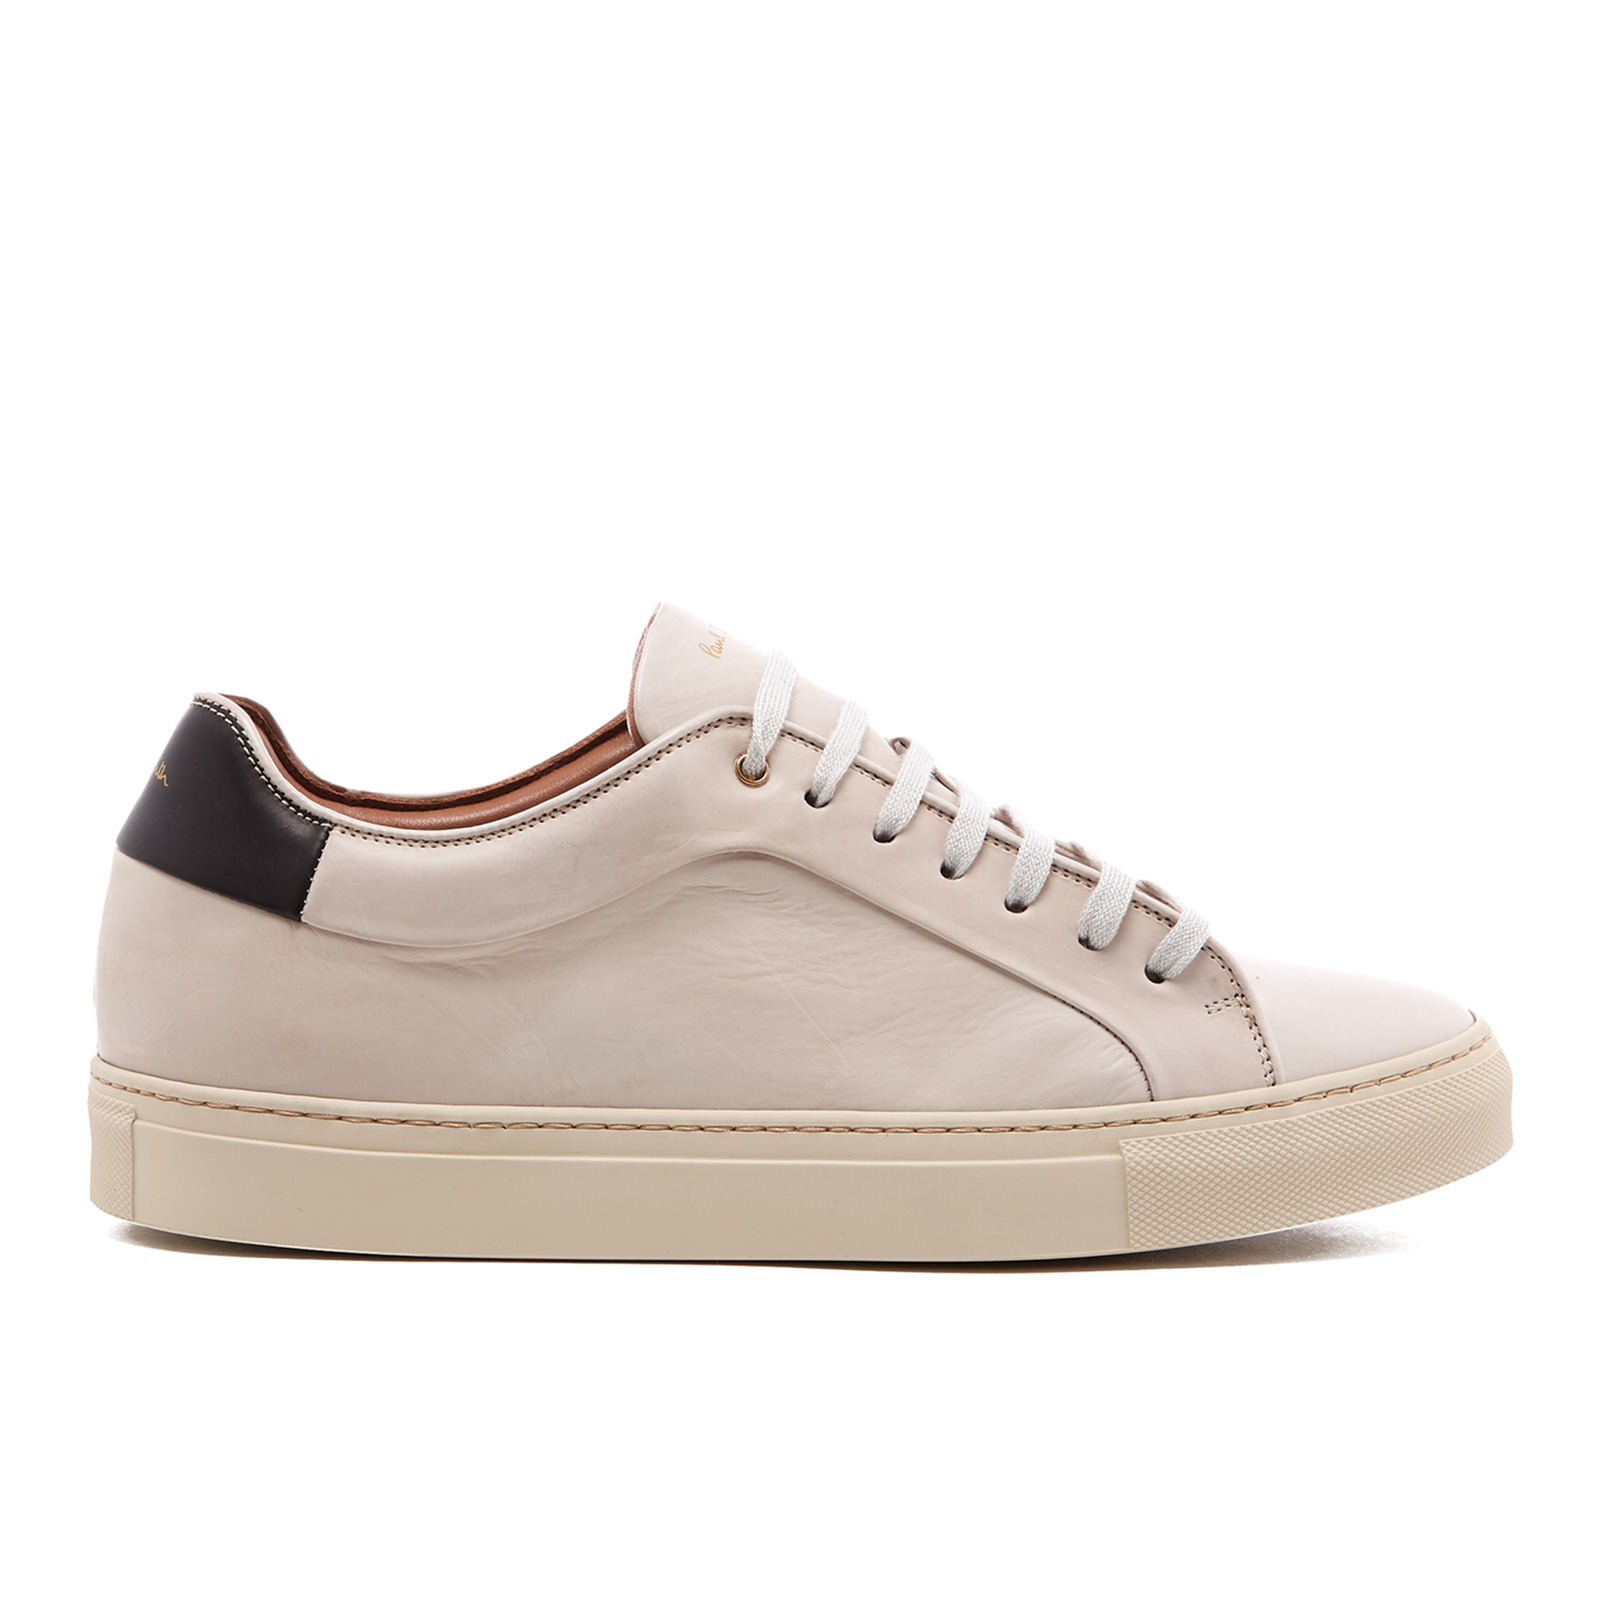 paul smith white basso trainers